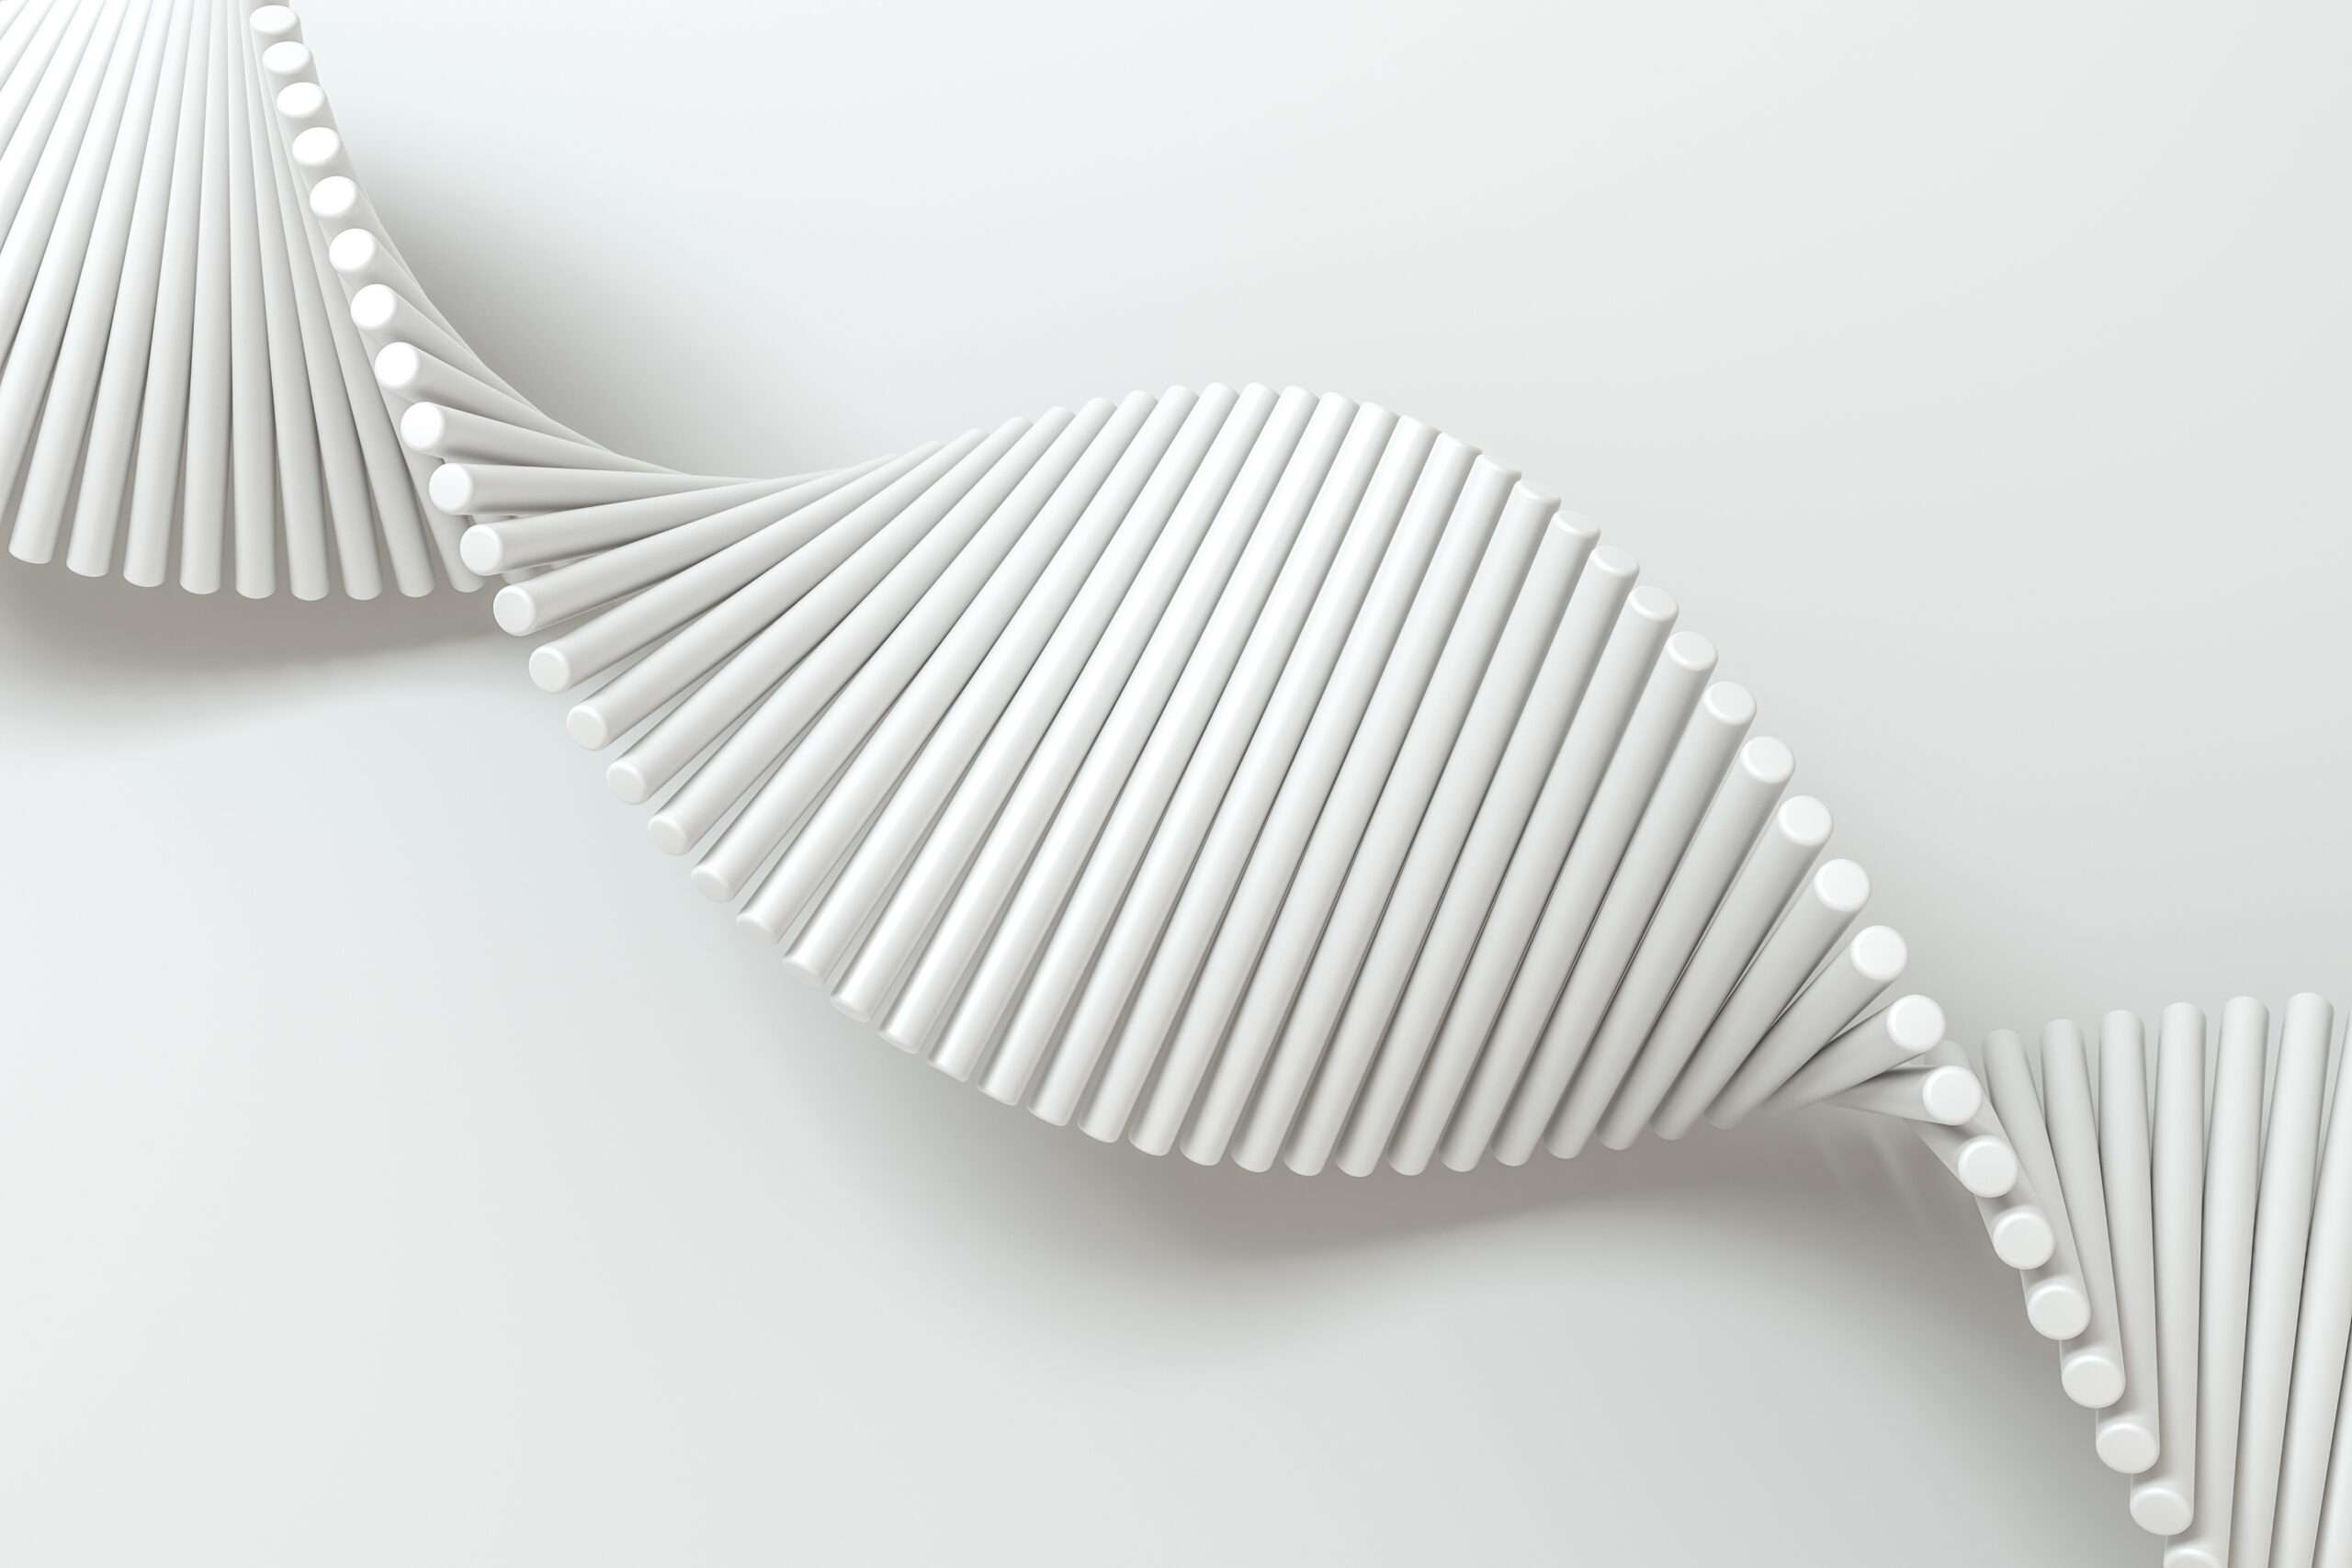 3d rendering of a DNA spiral on a white background